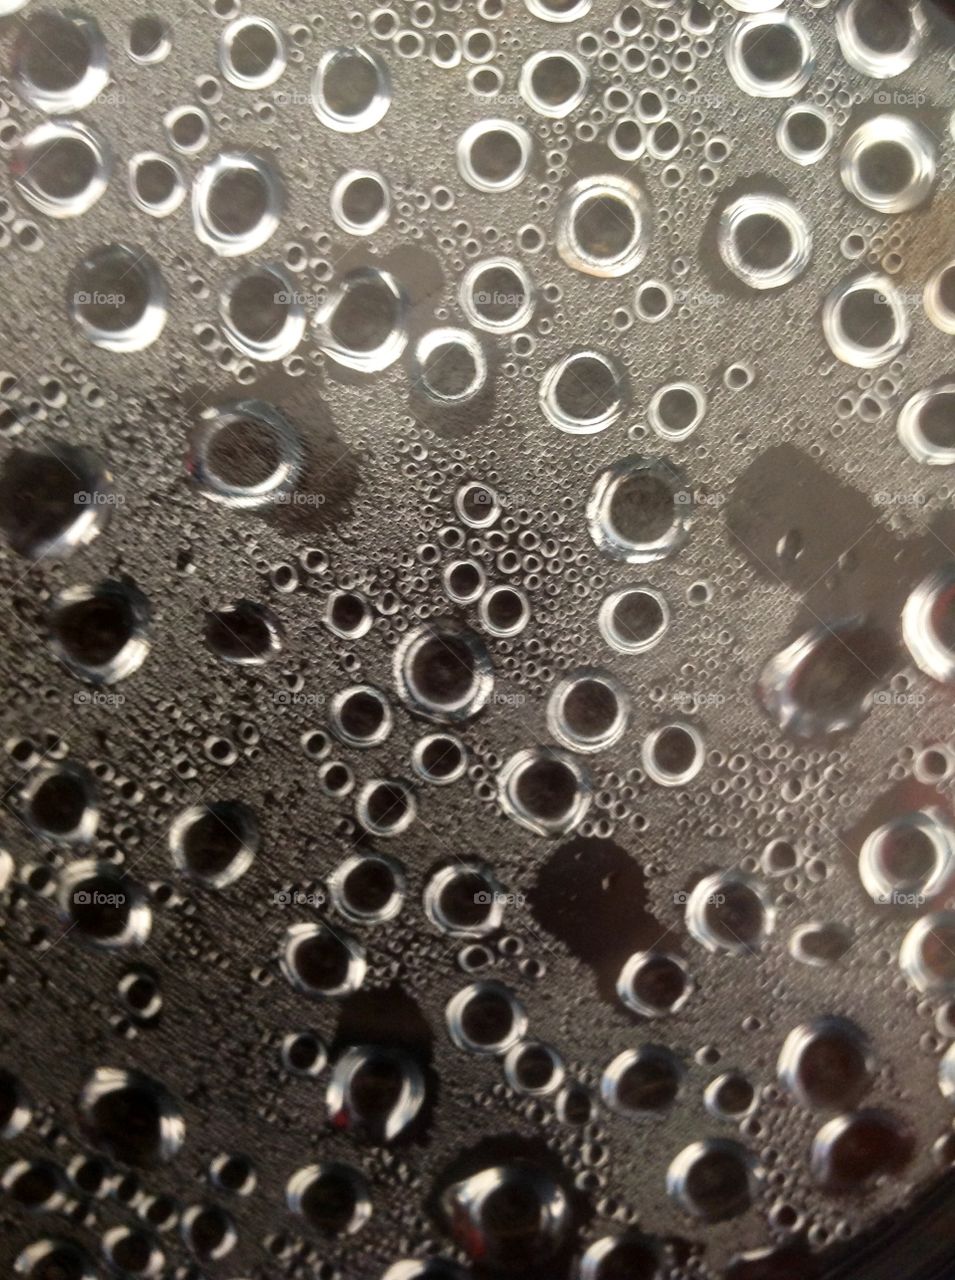 Beautiful pattern created by droplets from condensation of water vapor on a lid.